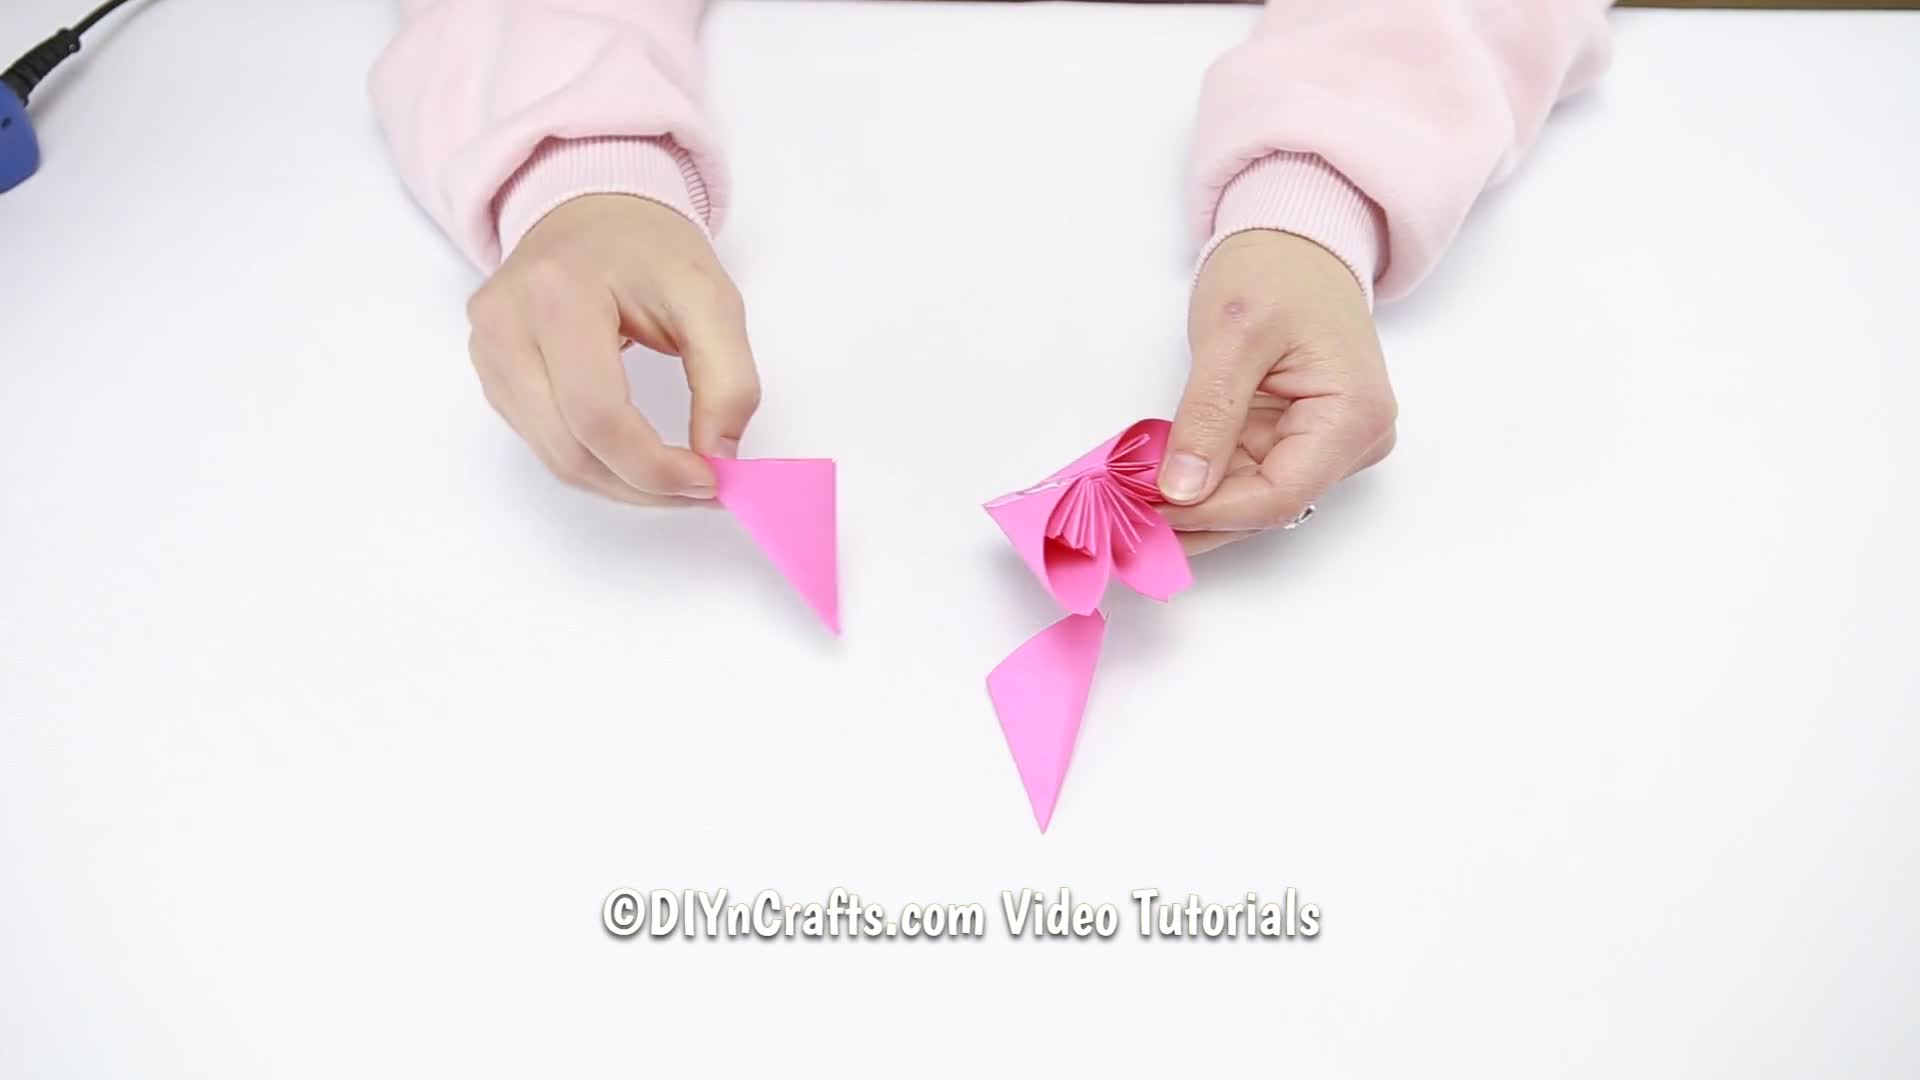 How to Make Paper Flower Balls